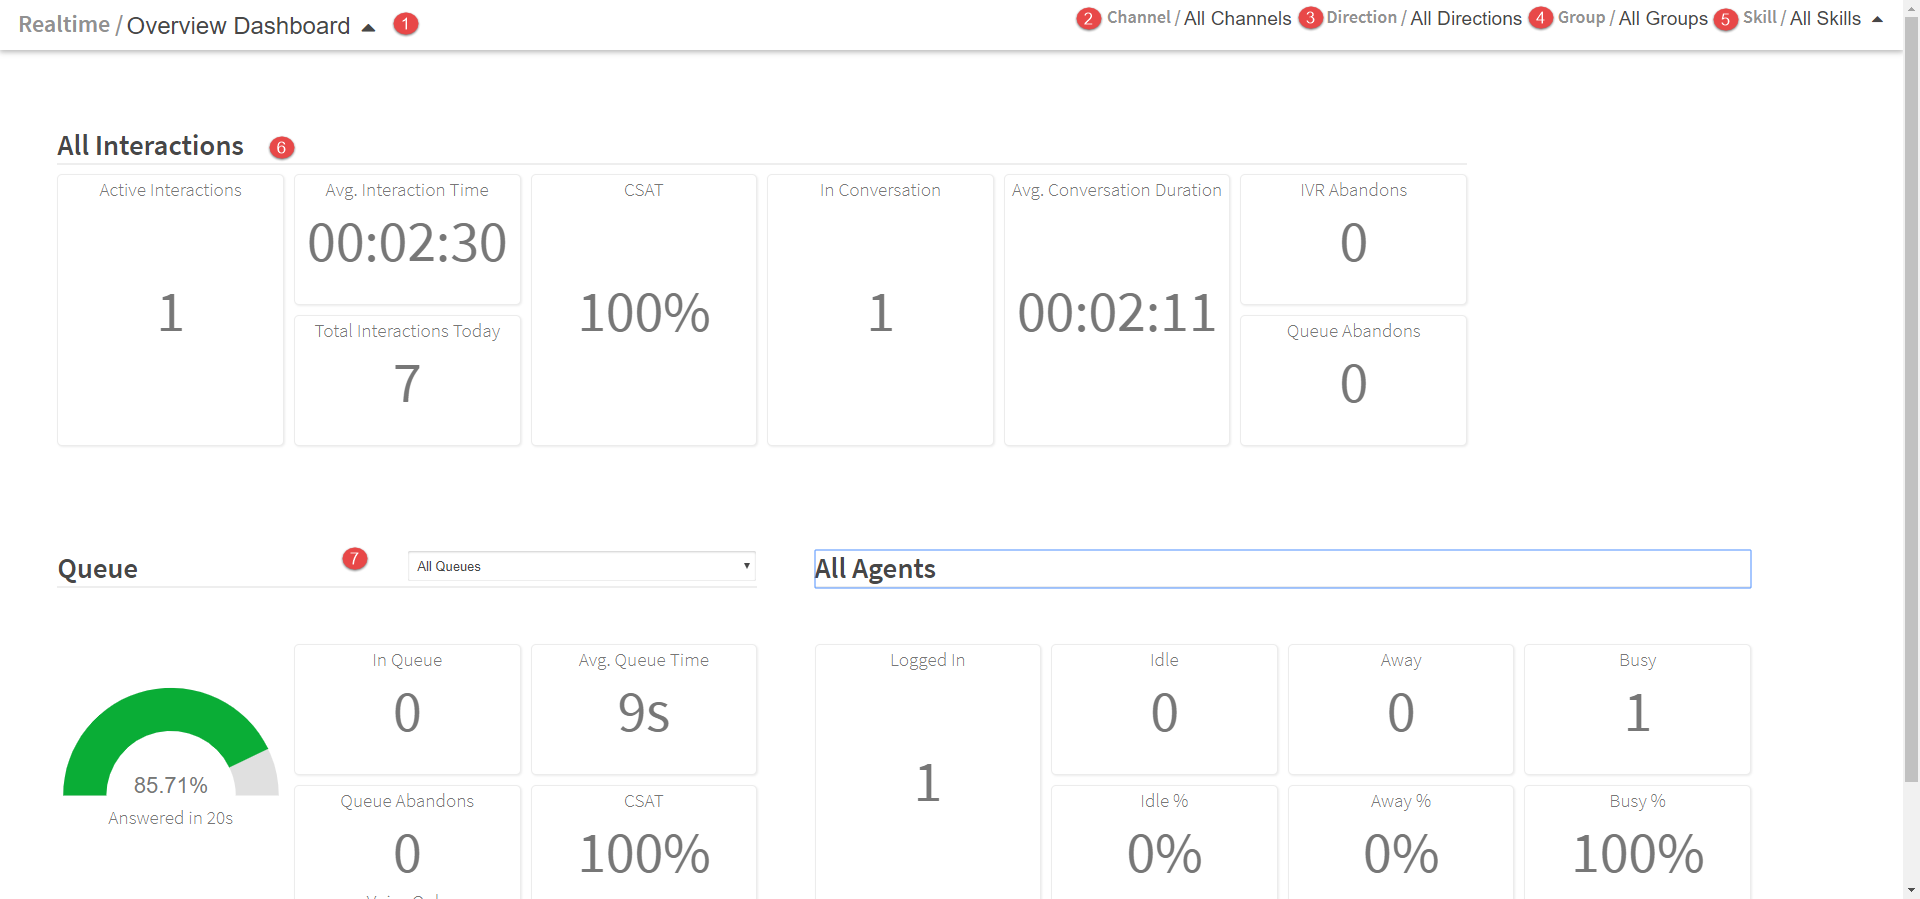 CxEngage realtime overview dashboard